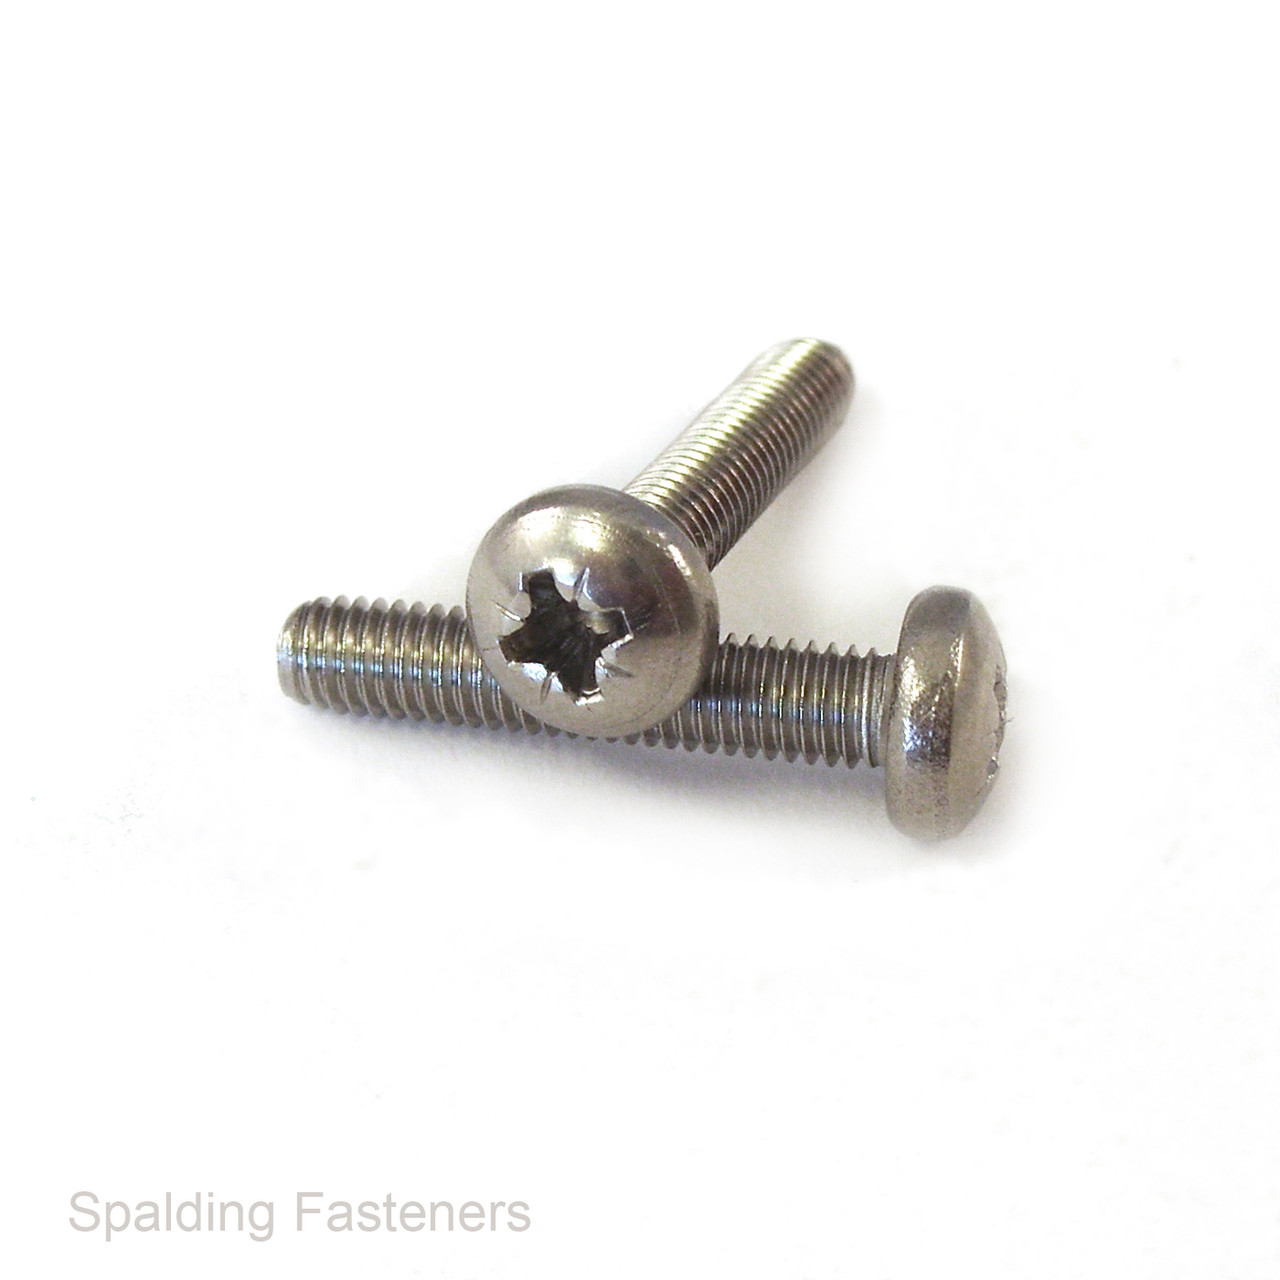 Assorted Metric M3 Stainless Pan Pozi Machine Screws with Nuts & Washers